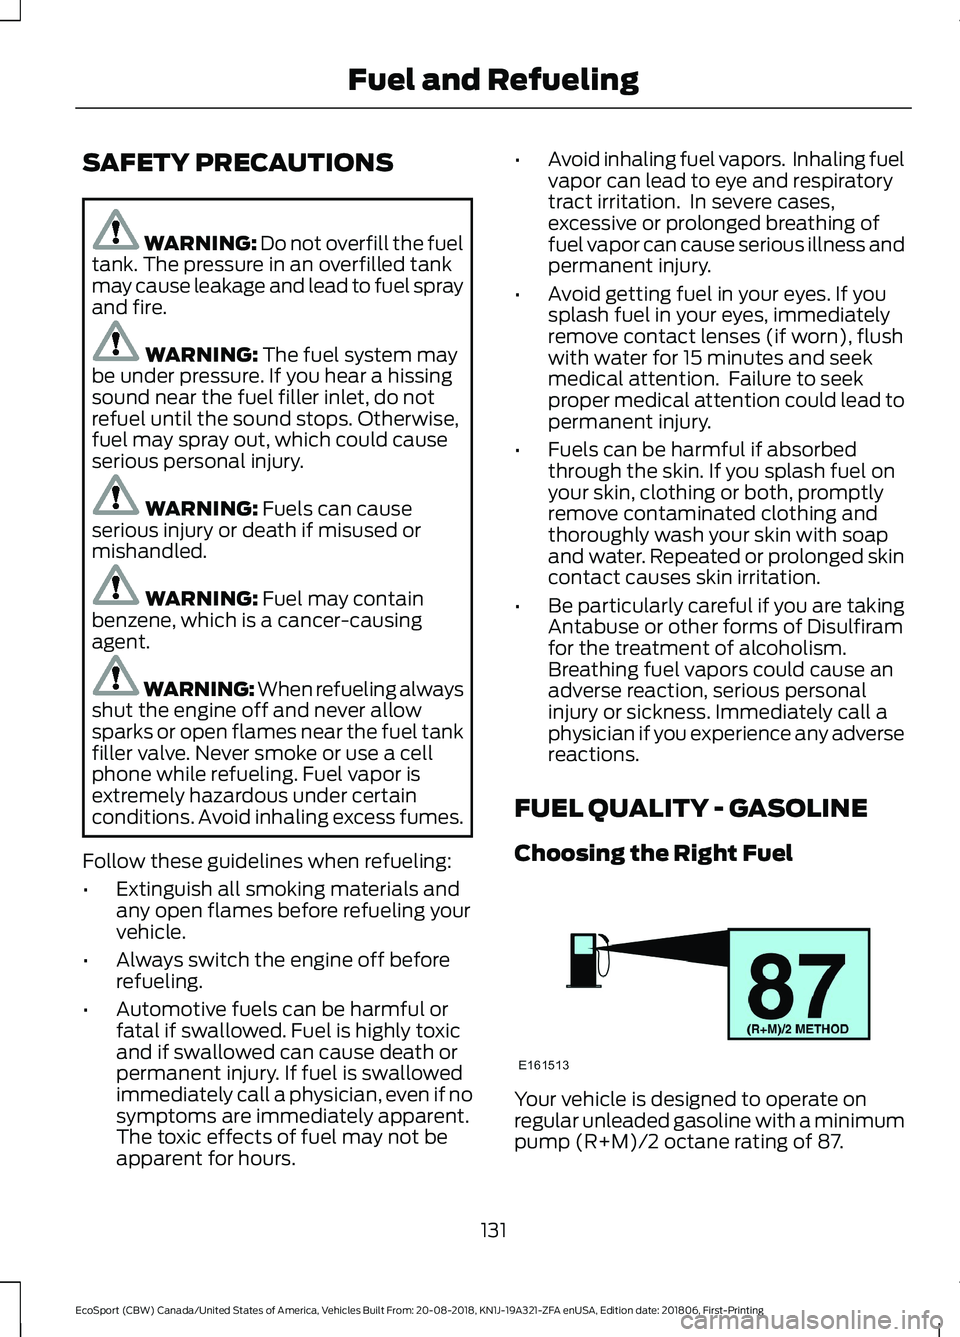 FORD ECOSPORT 2019  Owners Manual SAFETY PRECAUTIONS
WARNING: Do not overfill the fueltank. The pressure in an overfilled tankmay cause leakage and lead to fuel sprayand fire.
WARNING: The fuel system maybe under pressure. If you hear